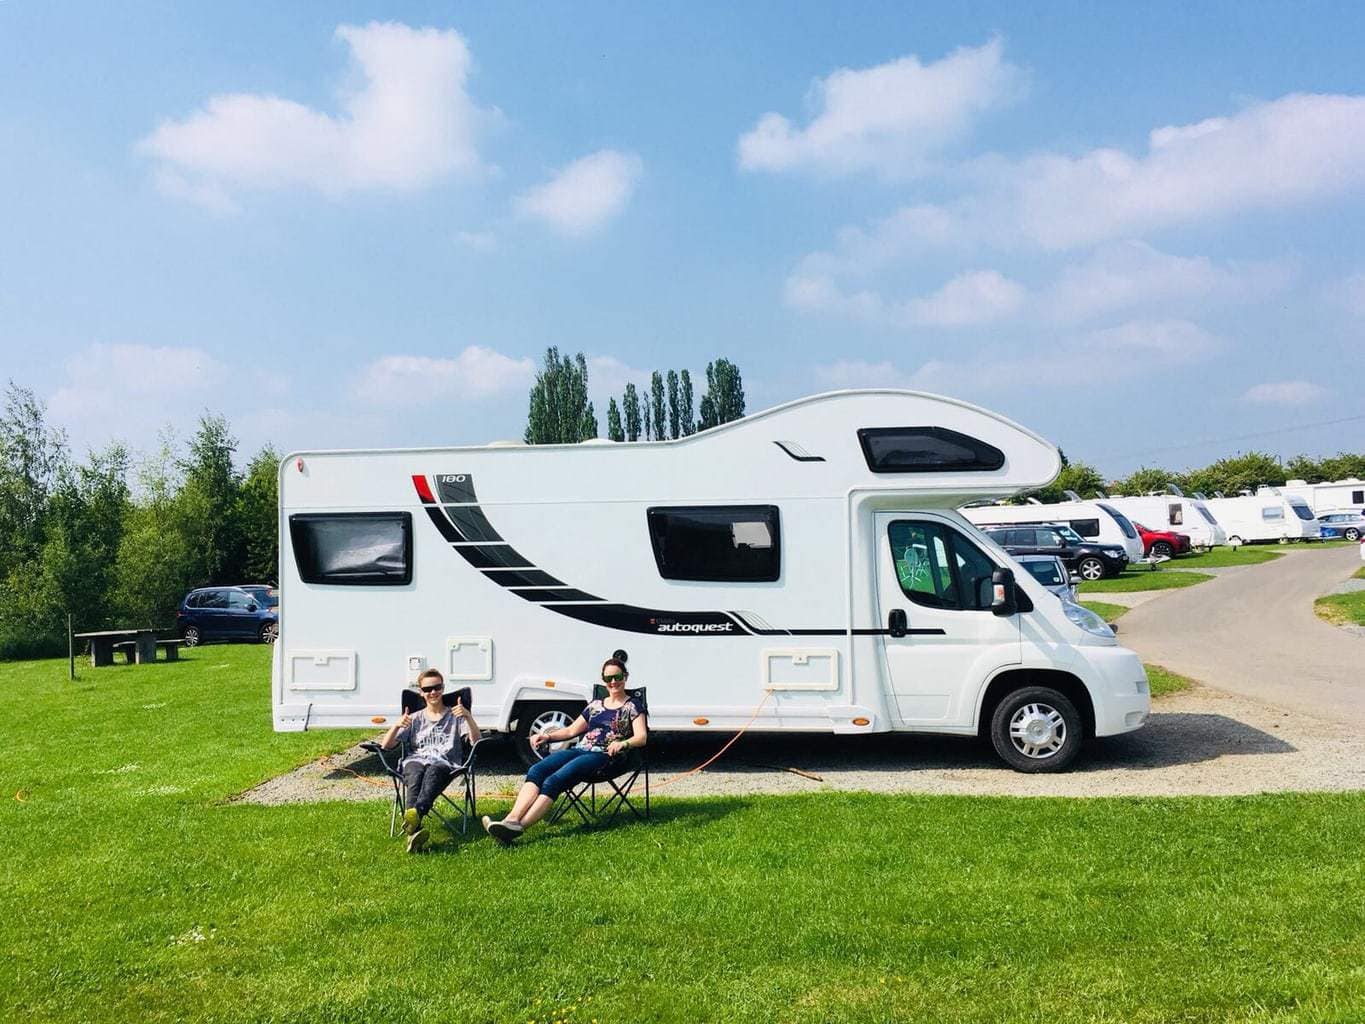 Family Camping at Conkers Camping and Caravanning Club Site and a Day Out at Conkers Forest